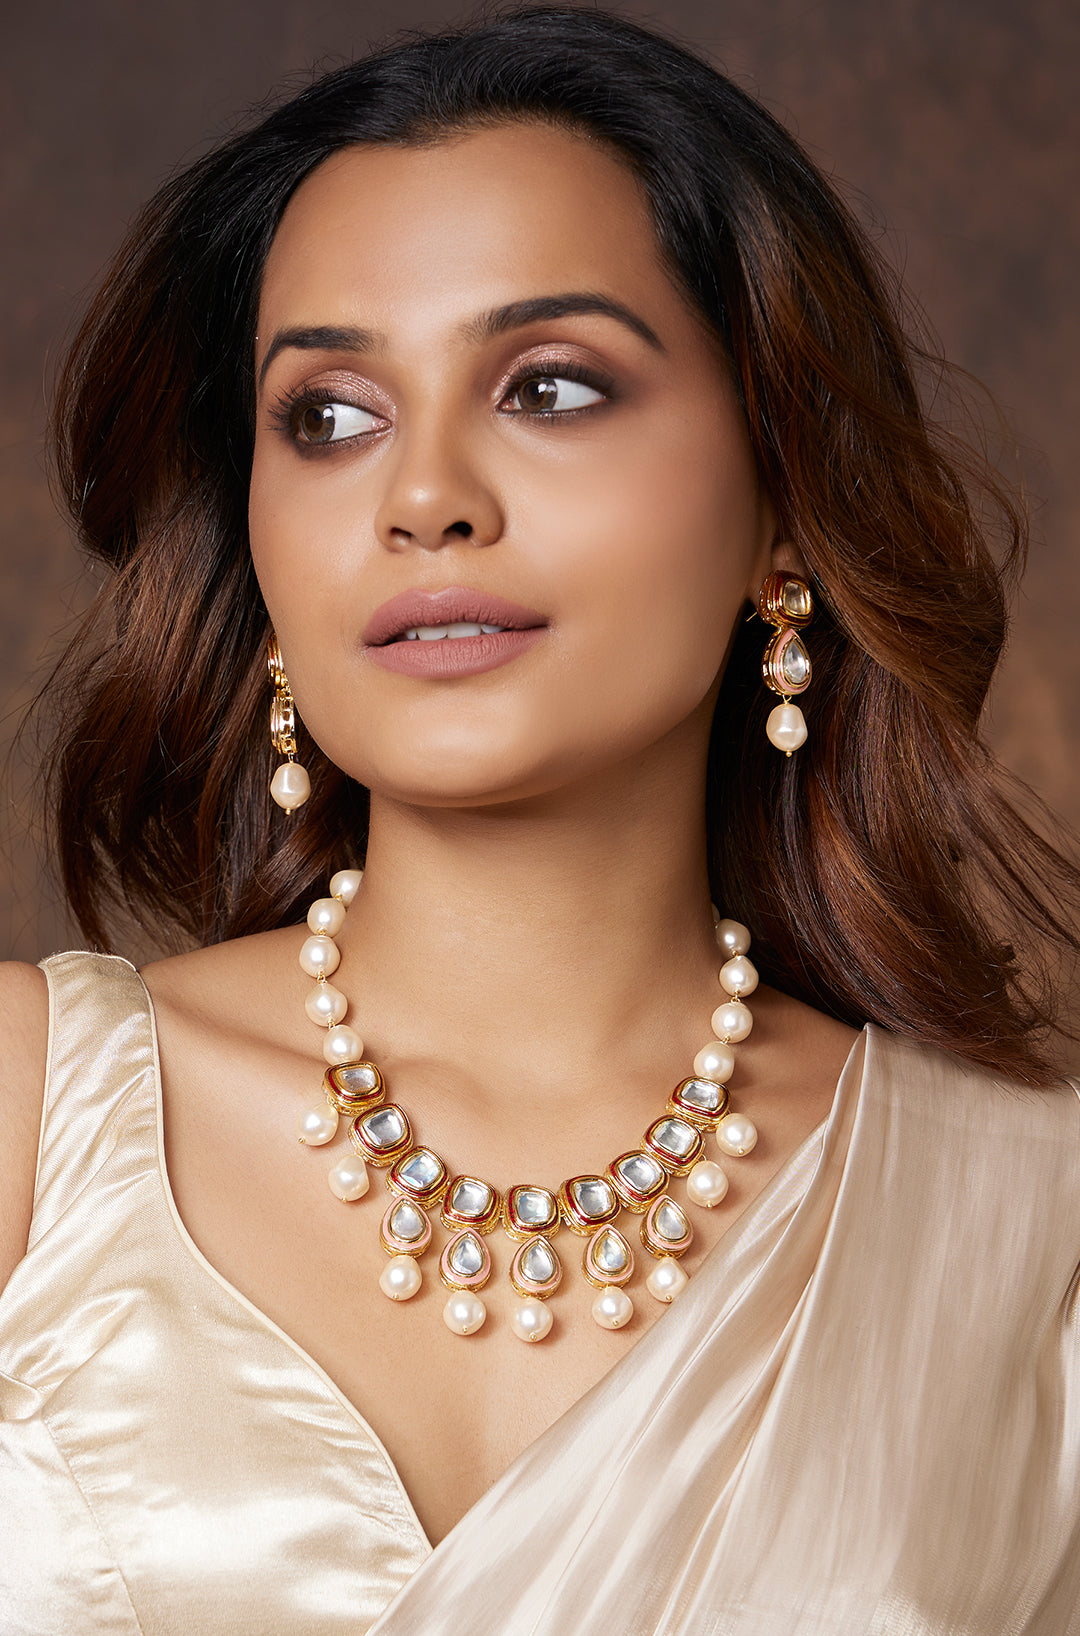 Load image into Gallery viewer, Kundan Polki Necklace Set With Pearls - Joules by Radhika
